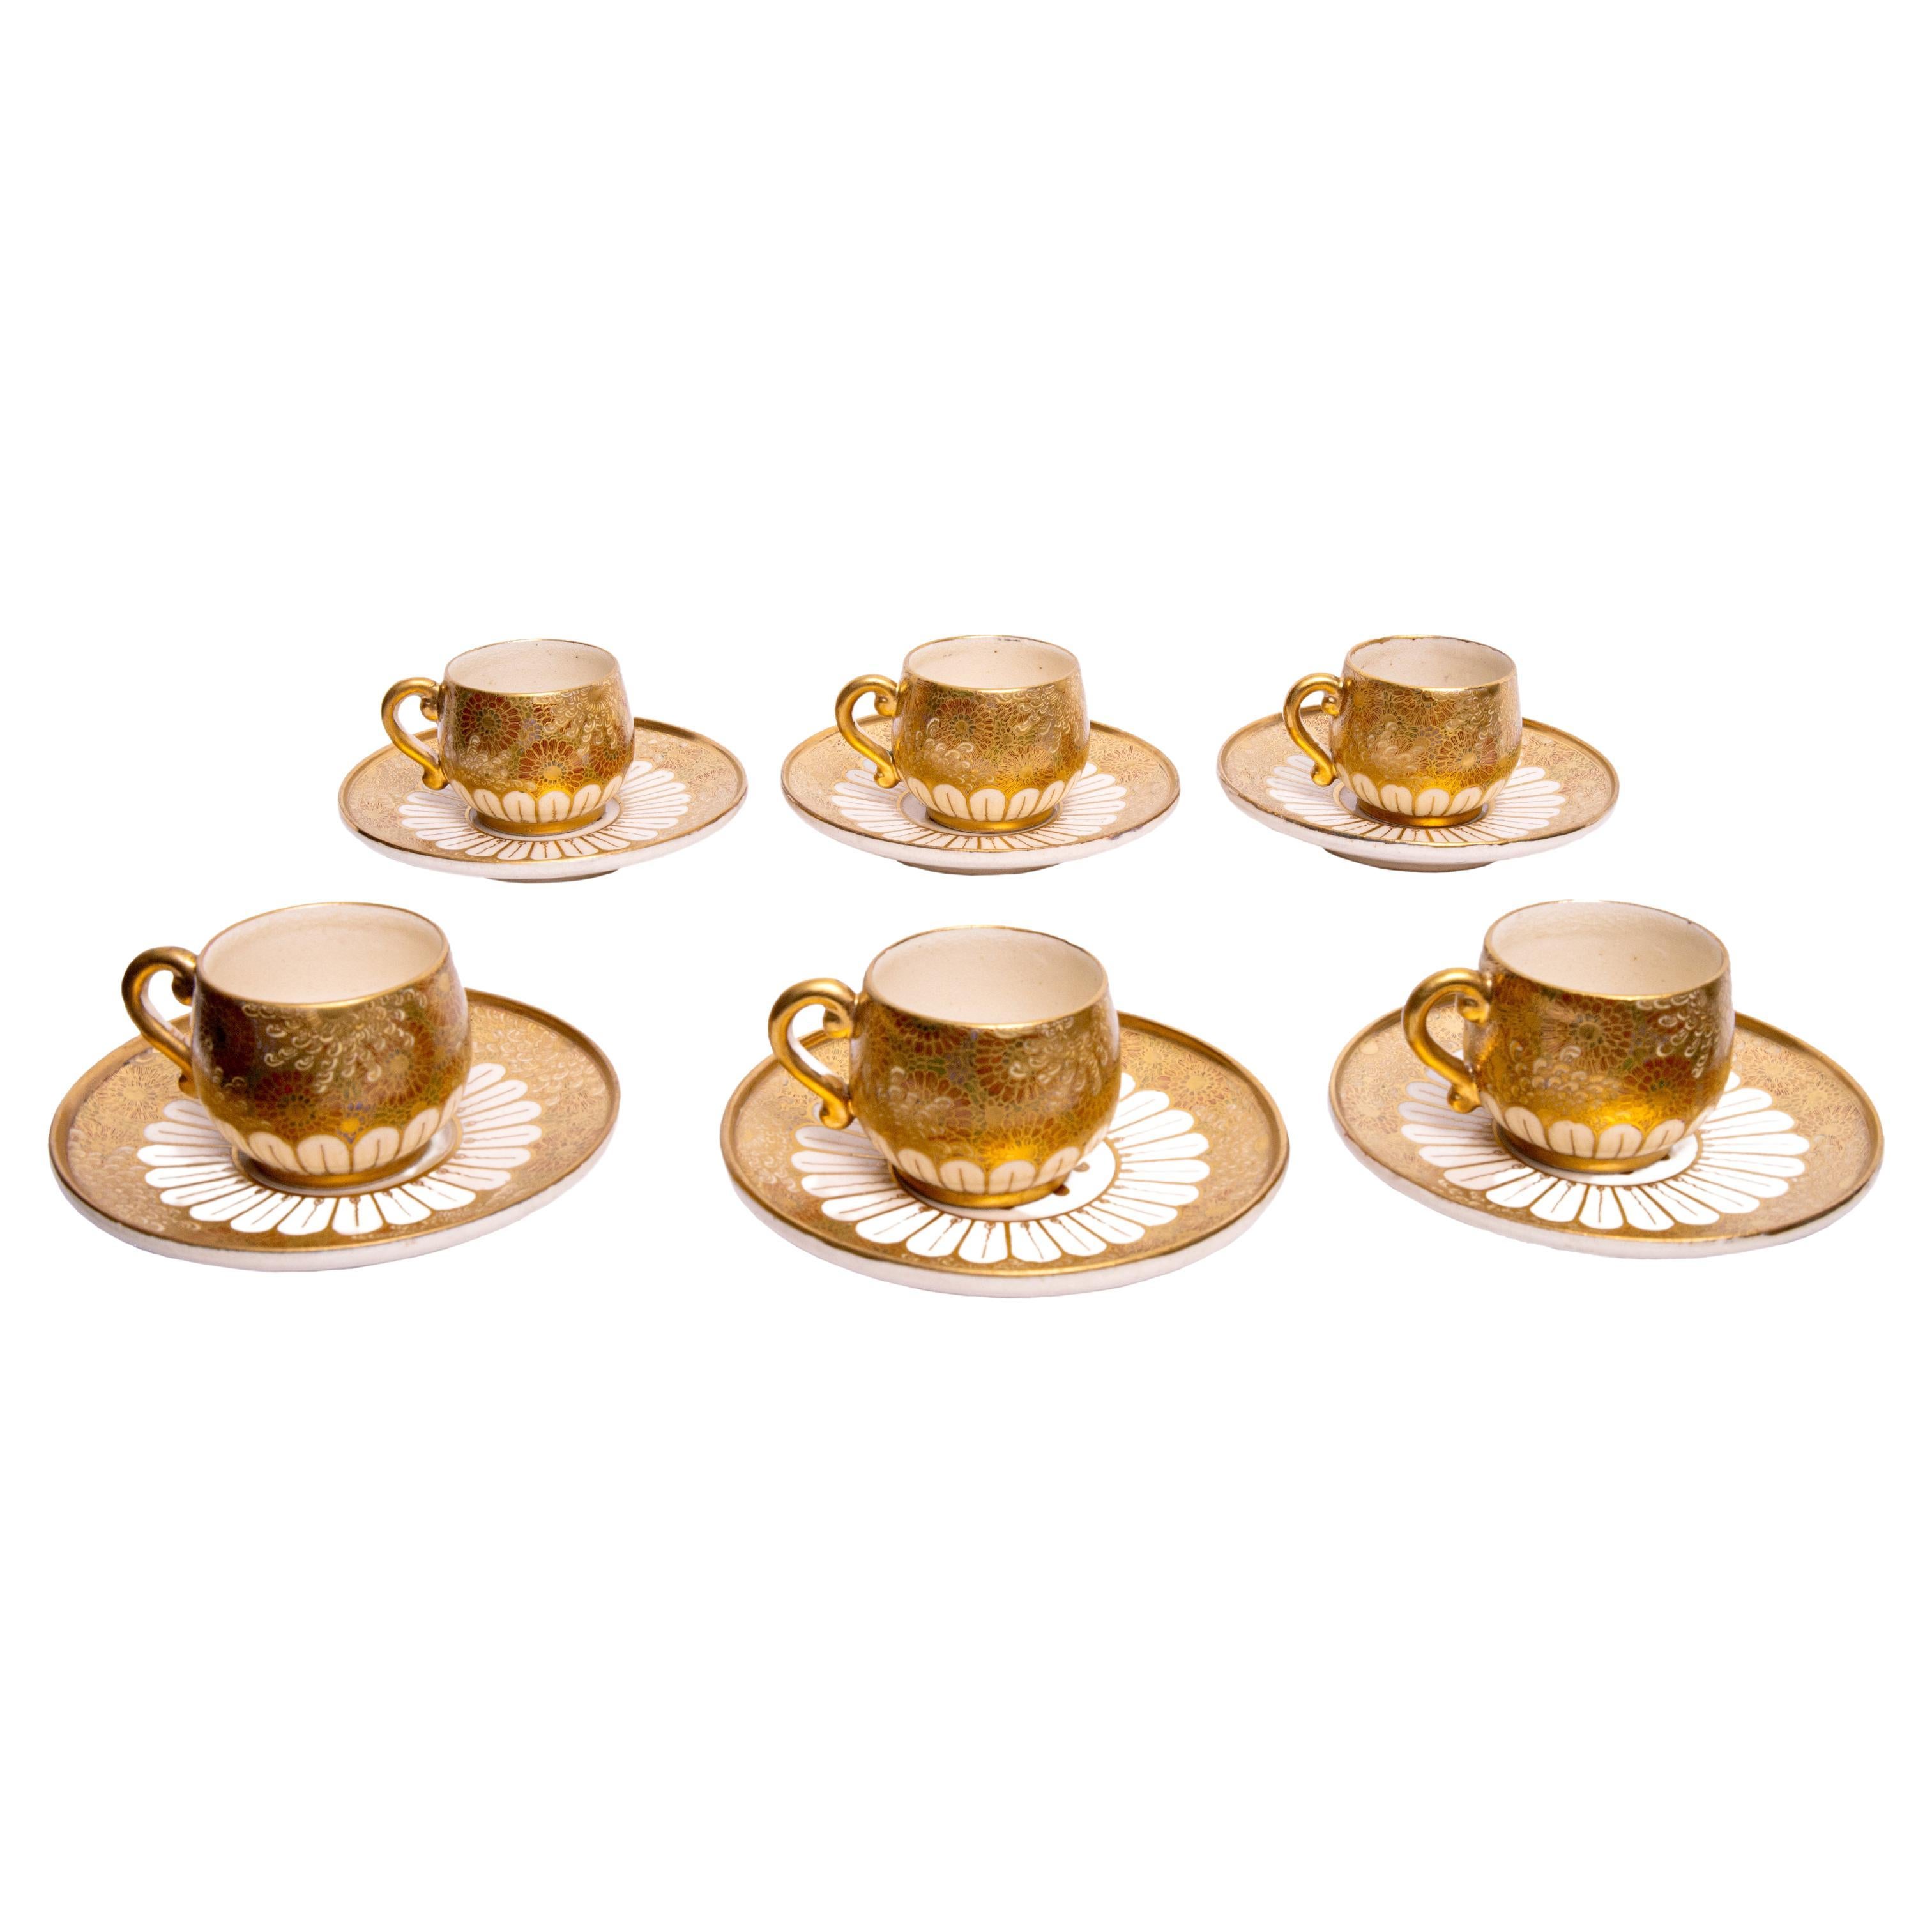 Antique Set of Six Japanese Sake Cups and Saucers, Late 19th Century